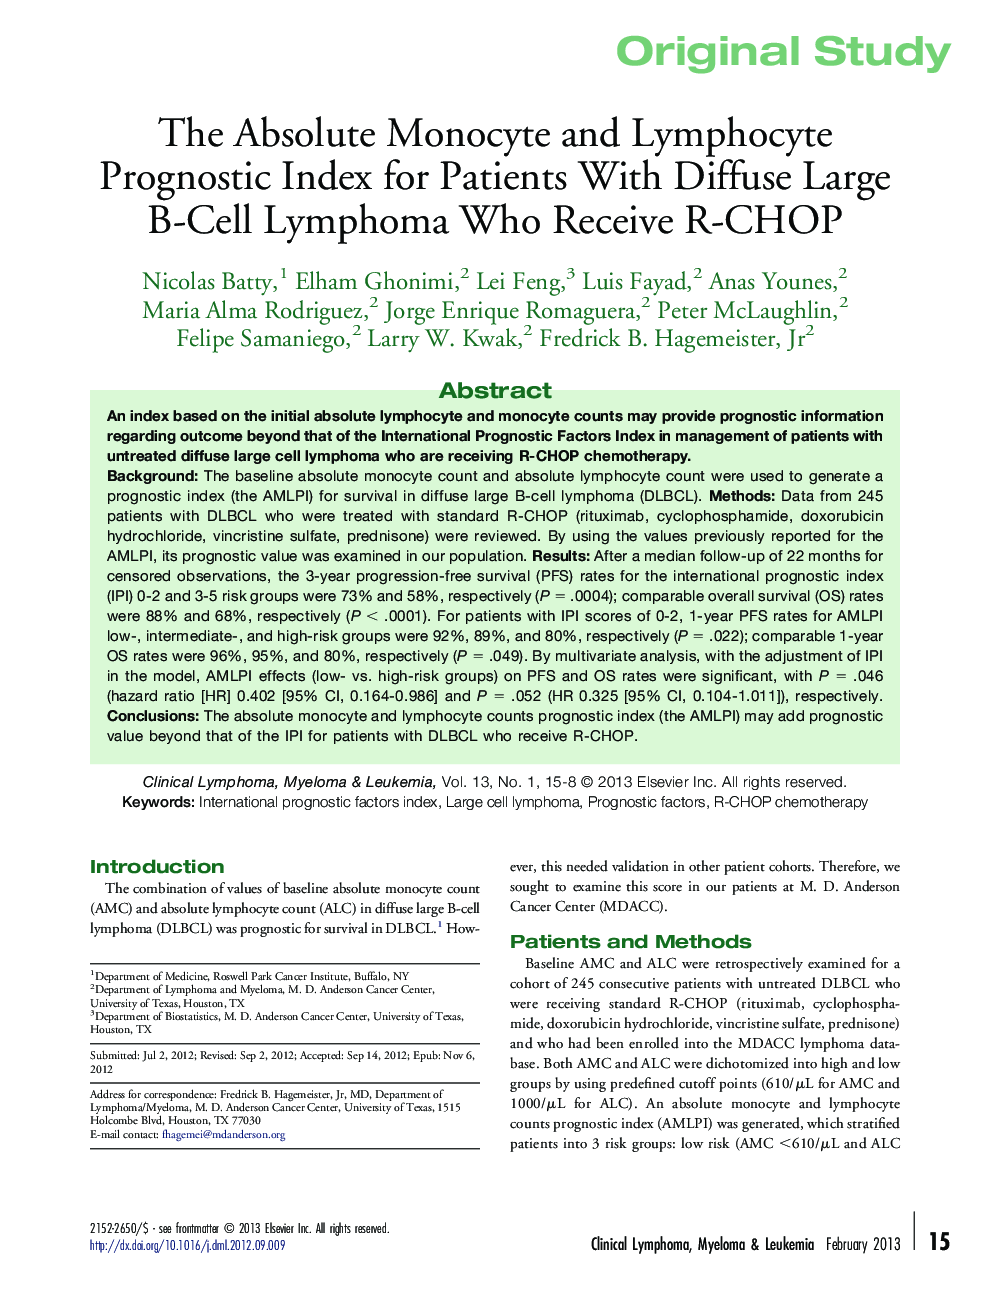 Original studyThe Absolute Monocyte and Lymphocyte Prognostic Index for Patients With Diffuse Large B-Cell Lymphoma Who Receive R-CHOP